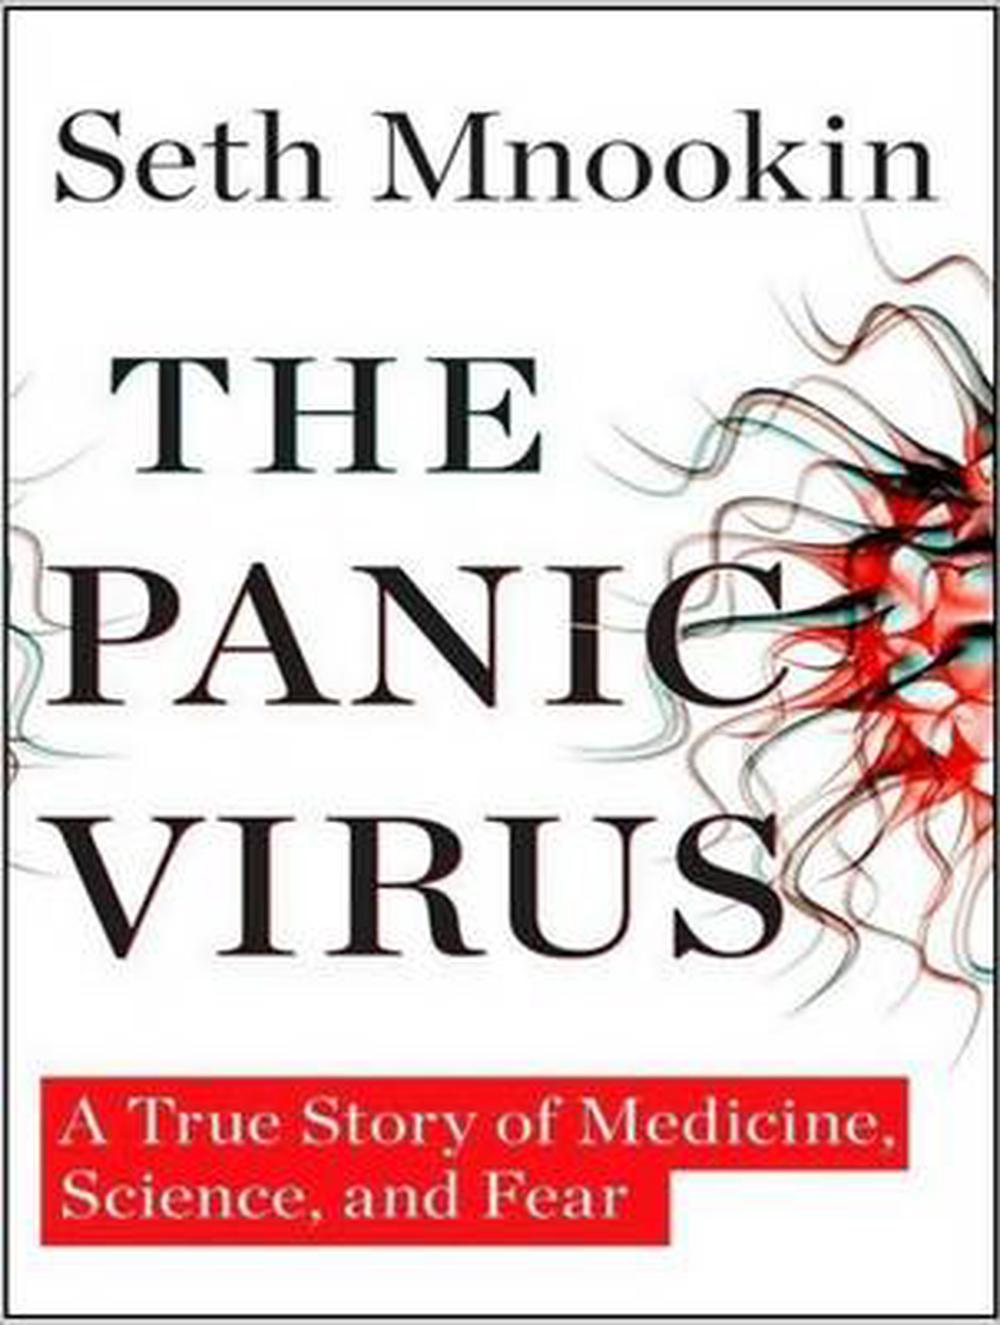 The Panic Virus A True Story of Medicine, Science, and Fear by Seth